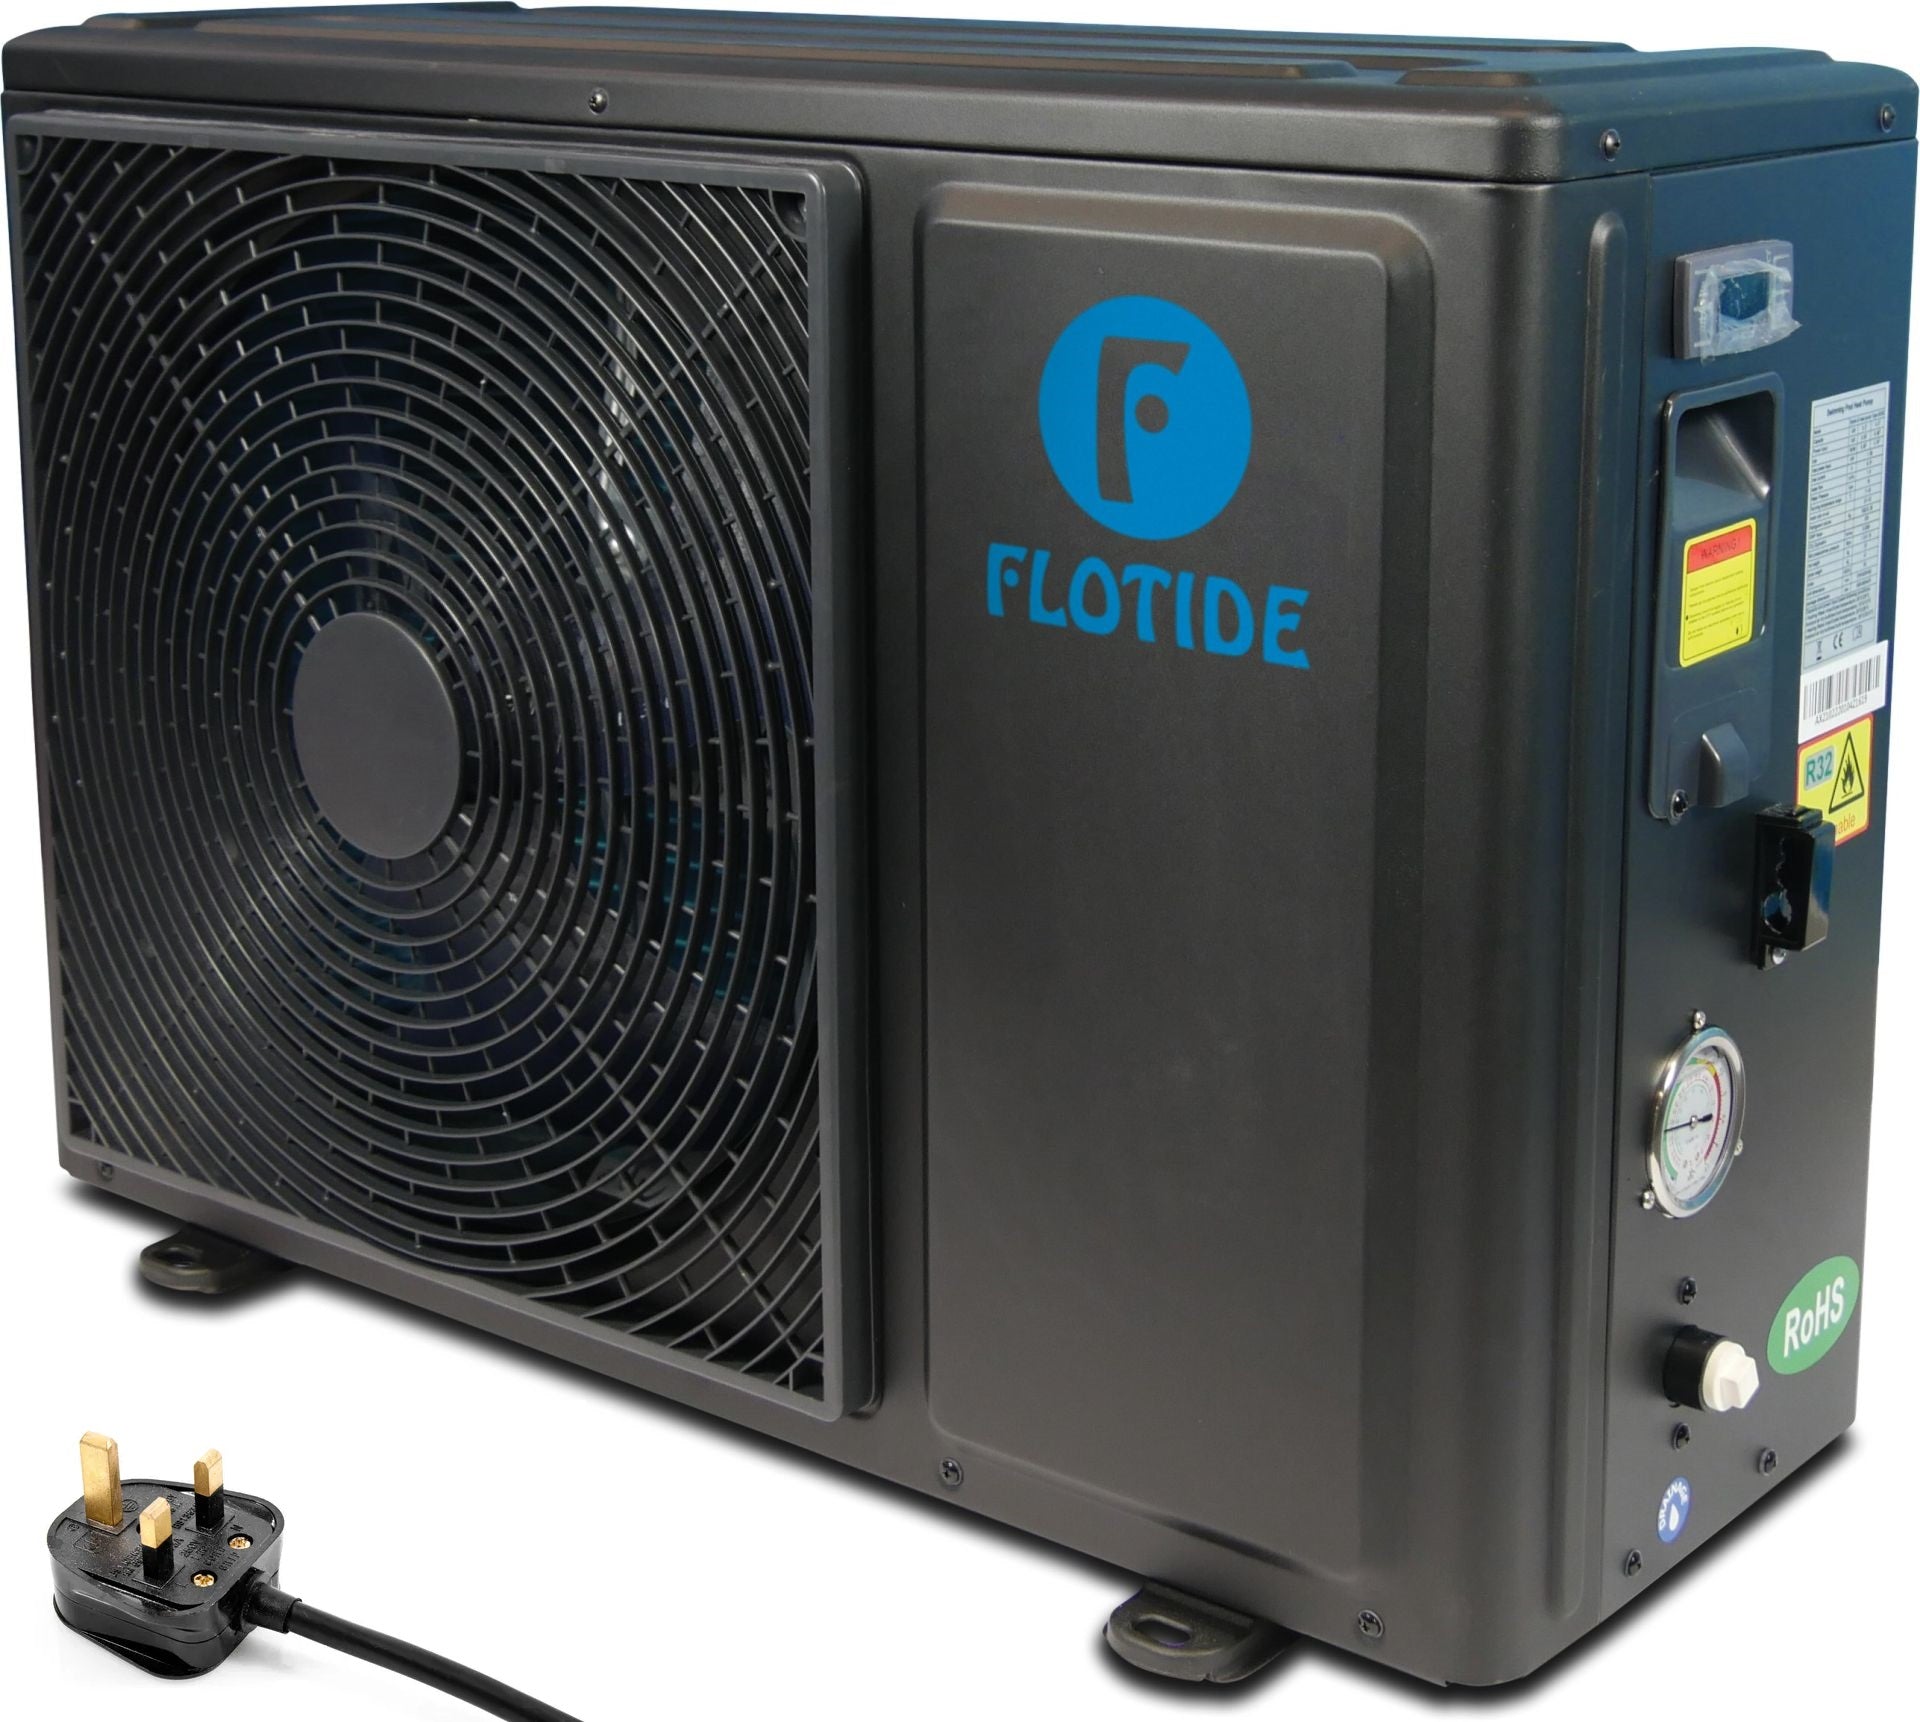 6.6KW Flotide Swimming Pool Heat Pump UK Plug and Play (A7)